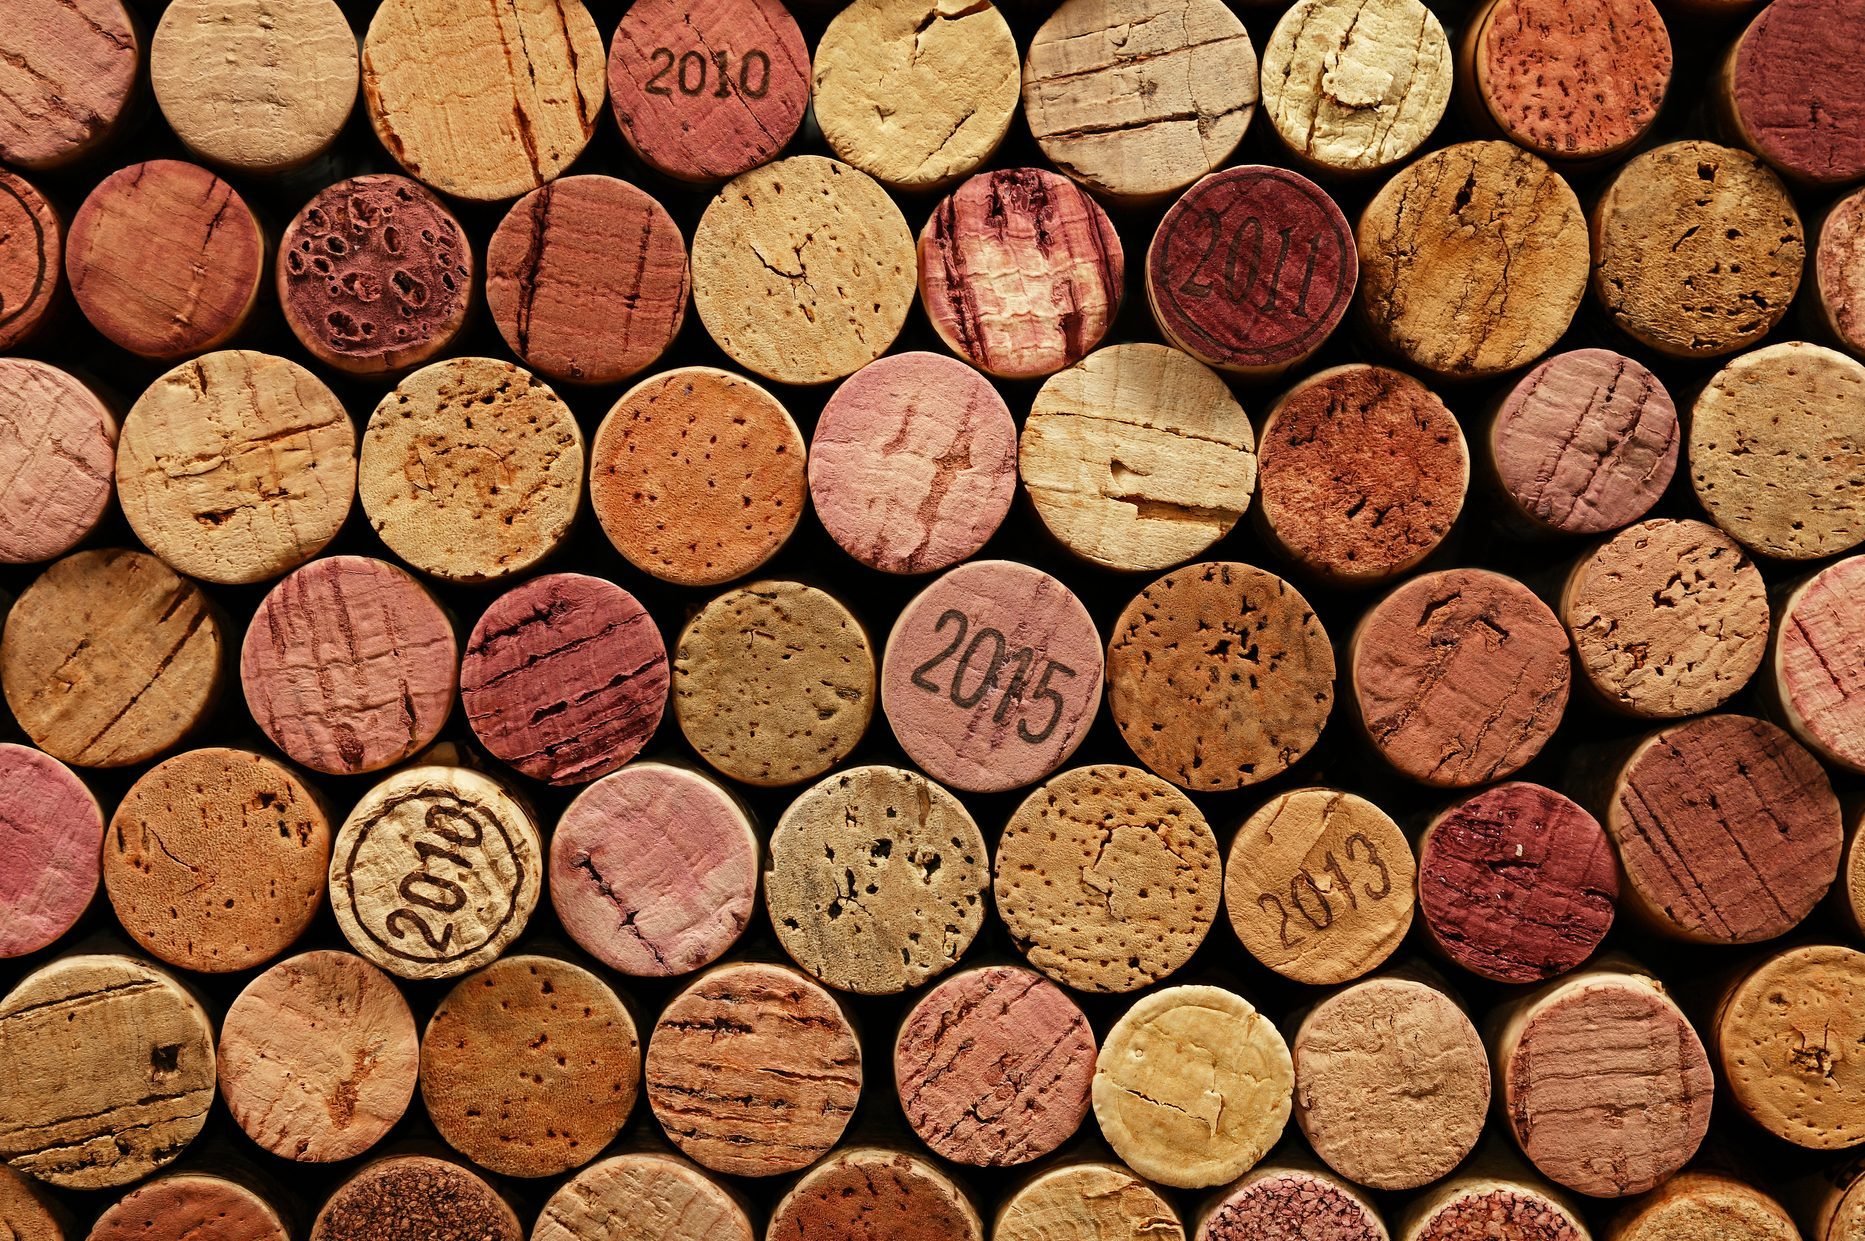 Close up background of used wine corks